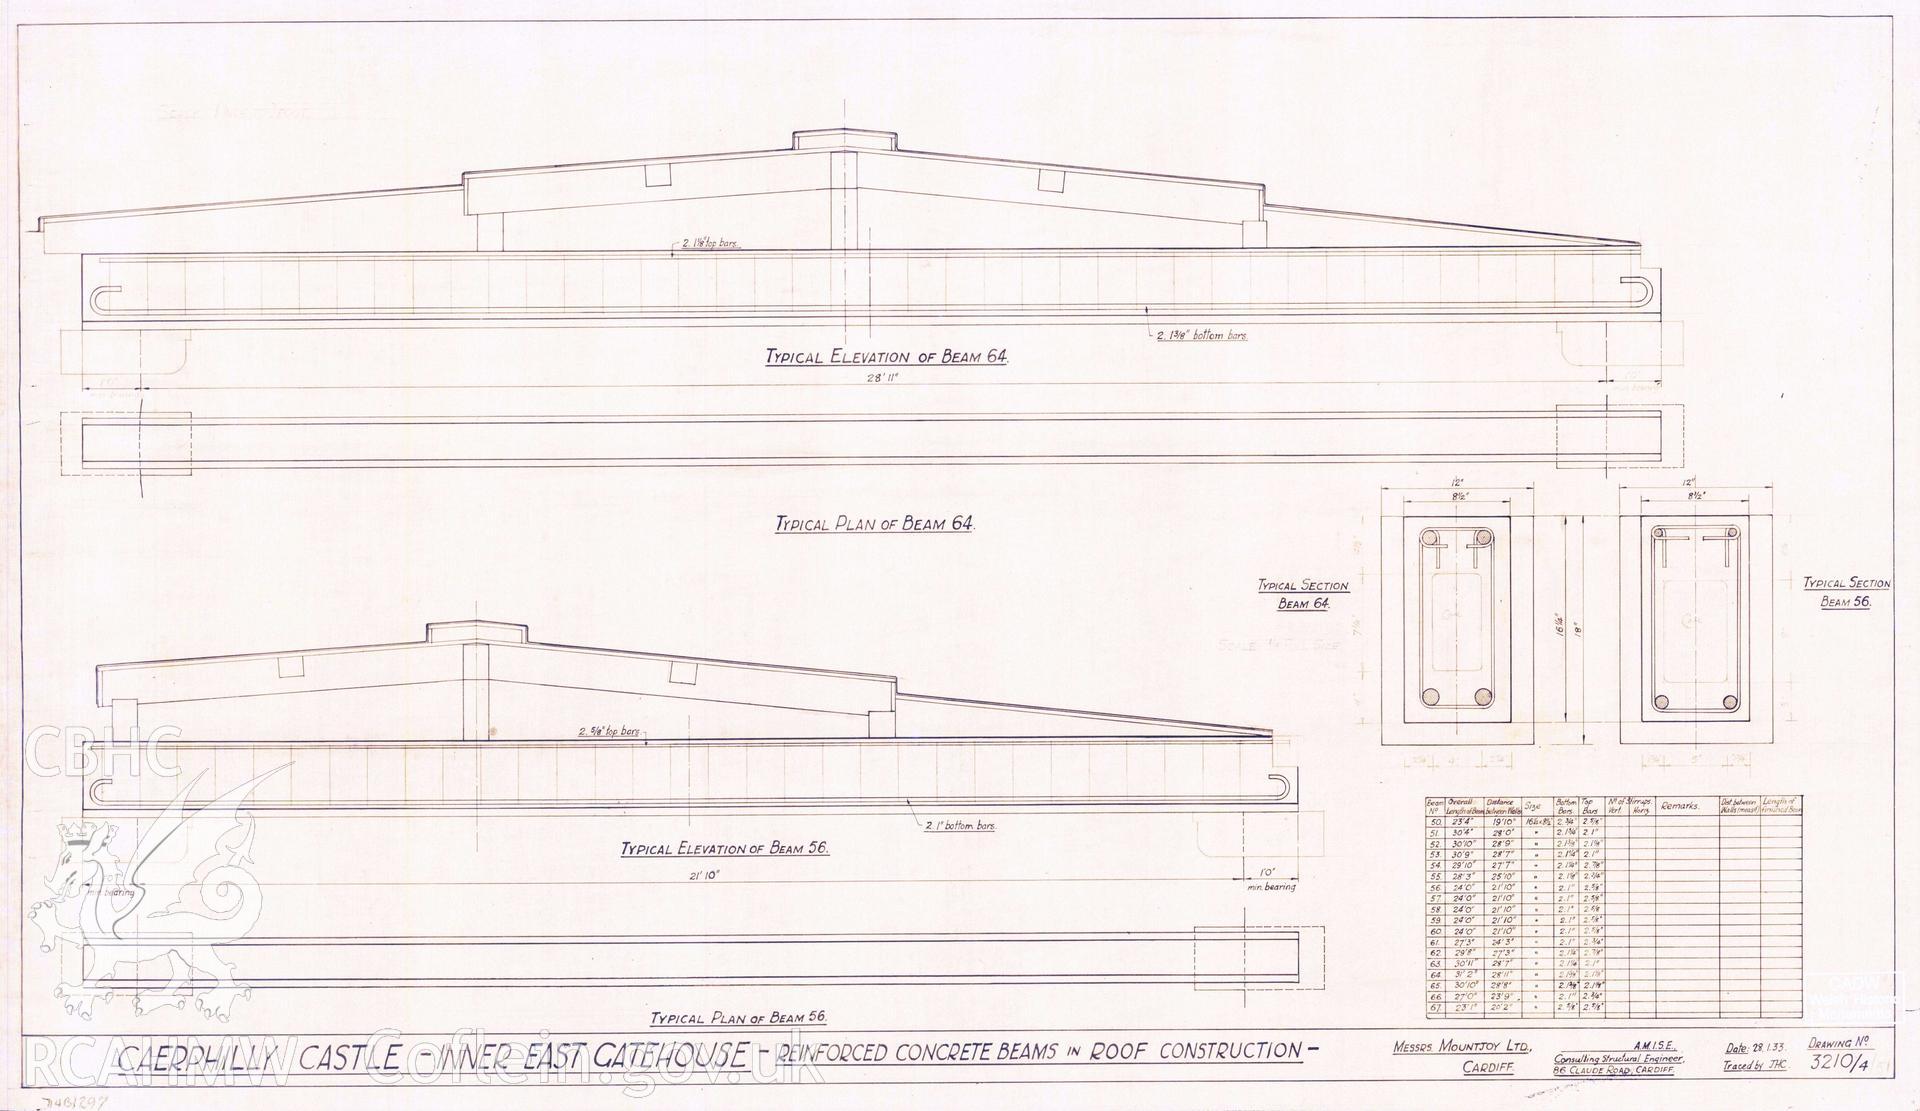 Cadw guardianship monument drawing of Caerphilly Castle. Inner E gatehouse, showing reinforced concrete beams in roof construction. Cadw Ref. No. 714B/297. No scale.